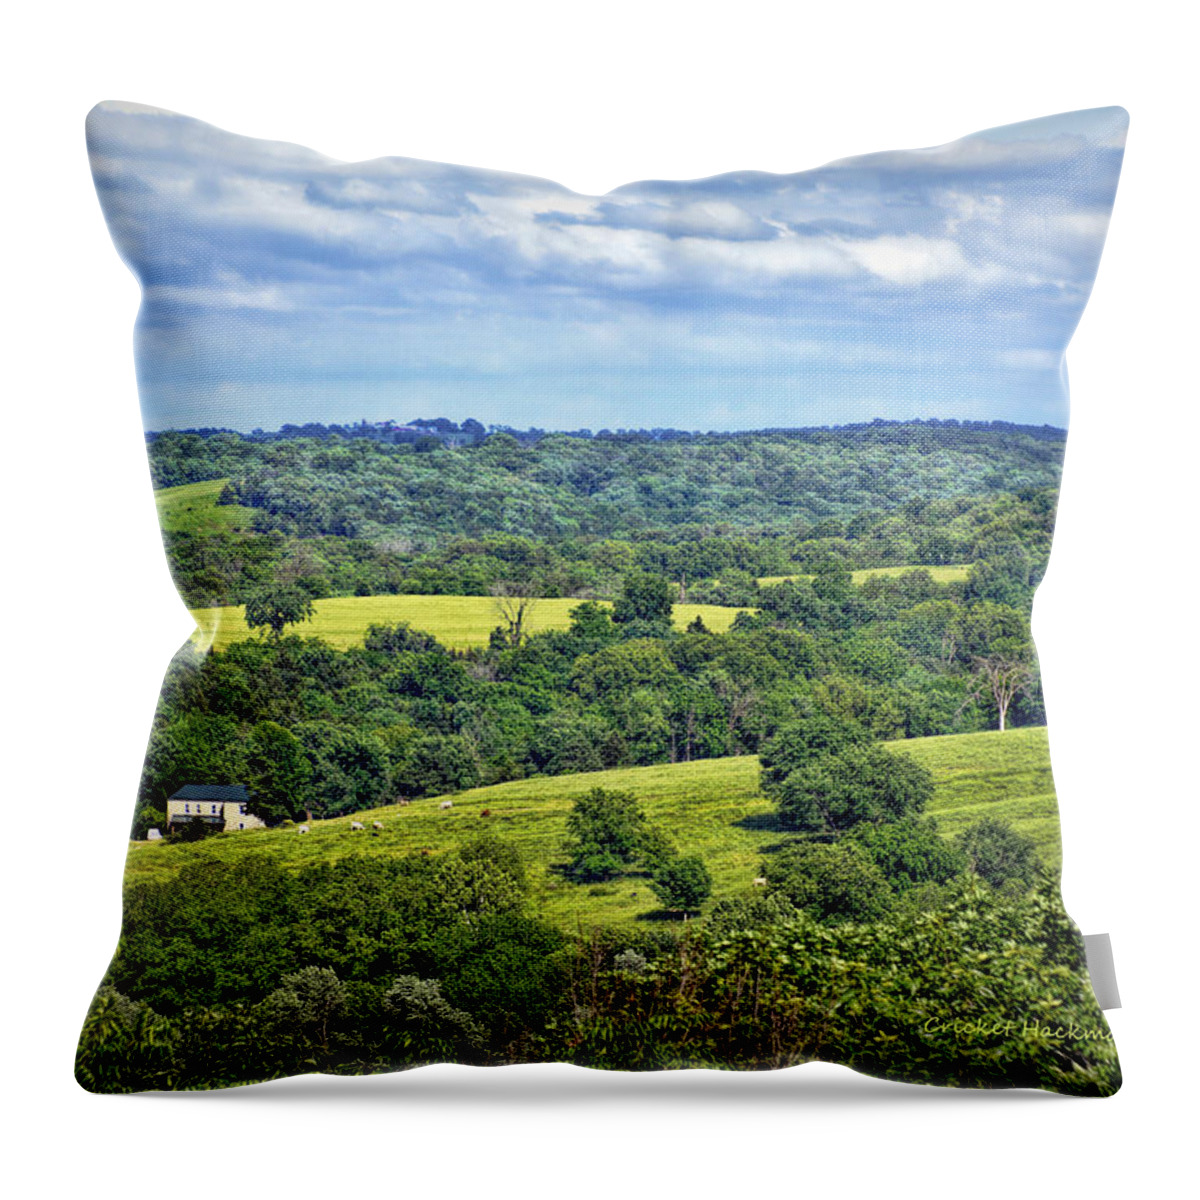 View Throw Pillow featuring the photograph Osage County Lookout by Cricket Hackmann